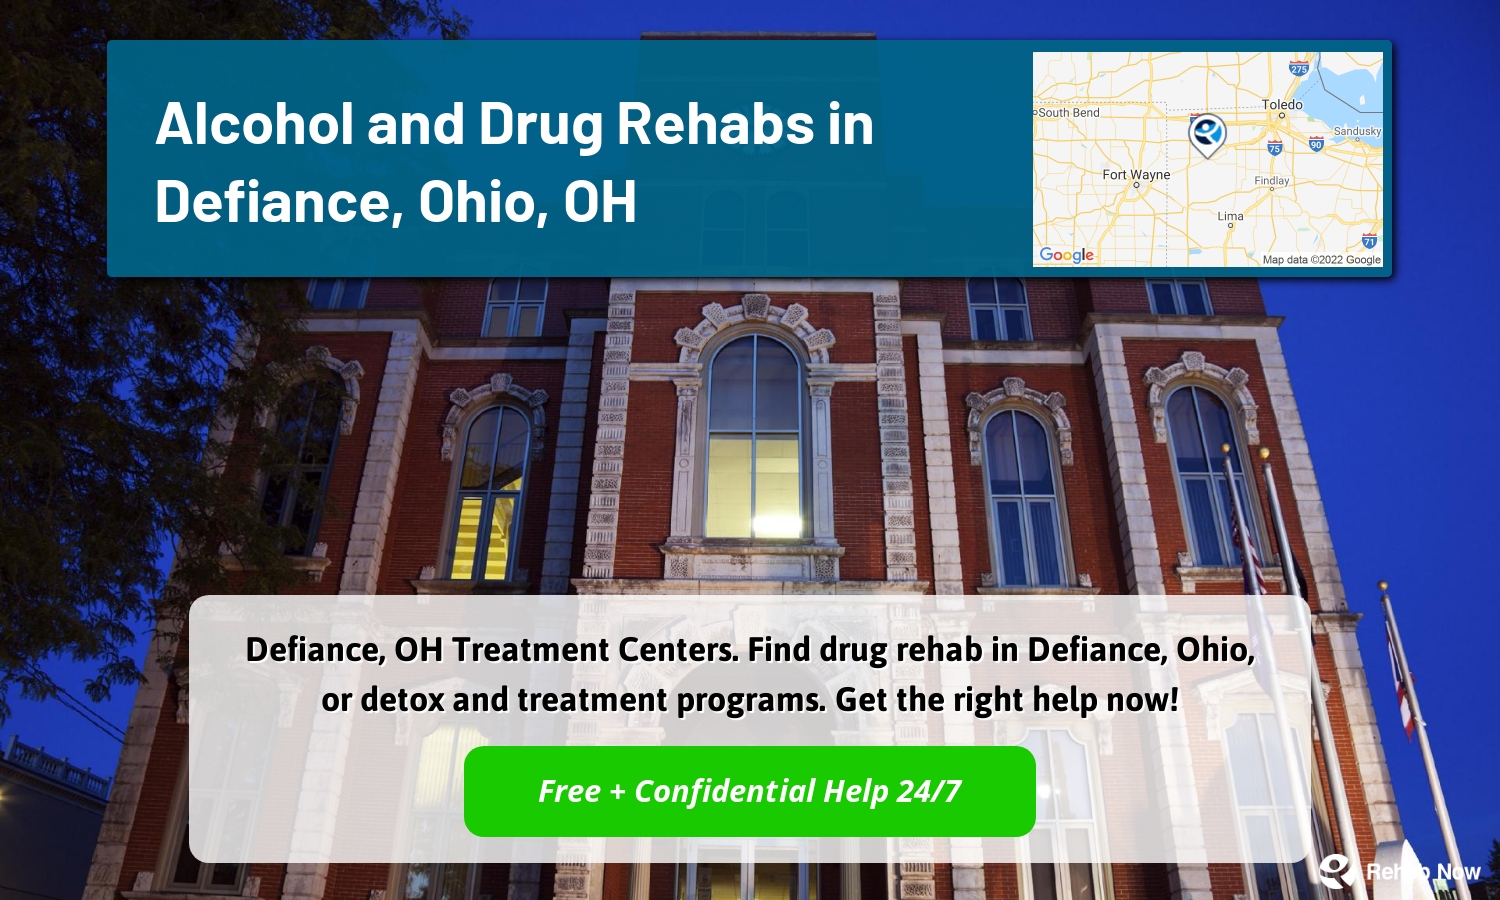 Defiance, OH Treatment Centers. Find drug rehab in Defiance, Ohio, or detox and treatment programs. Get the right help now!